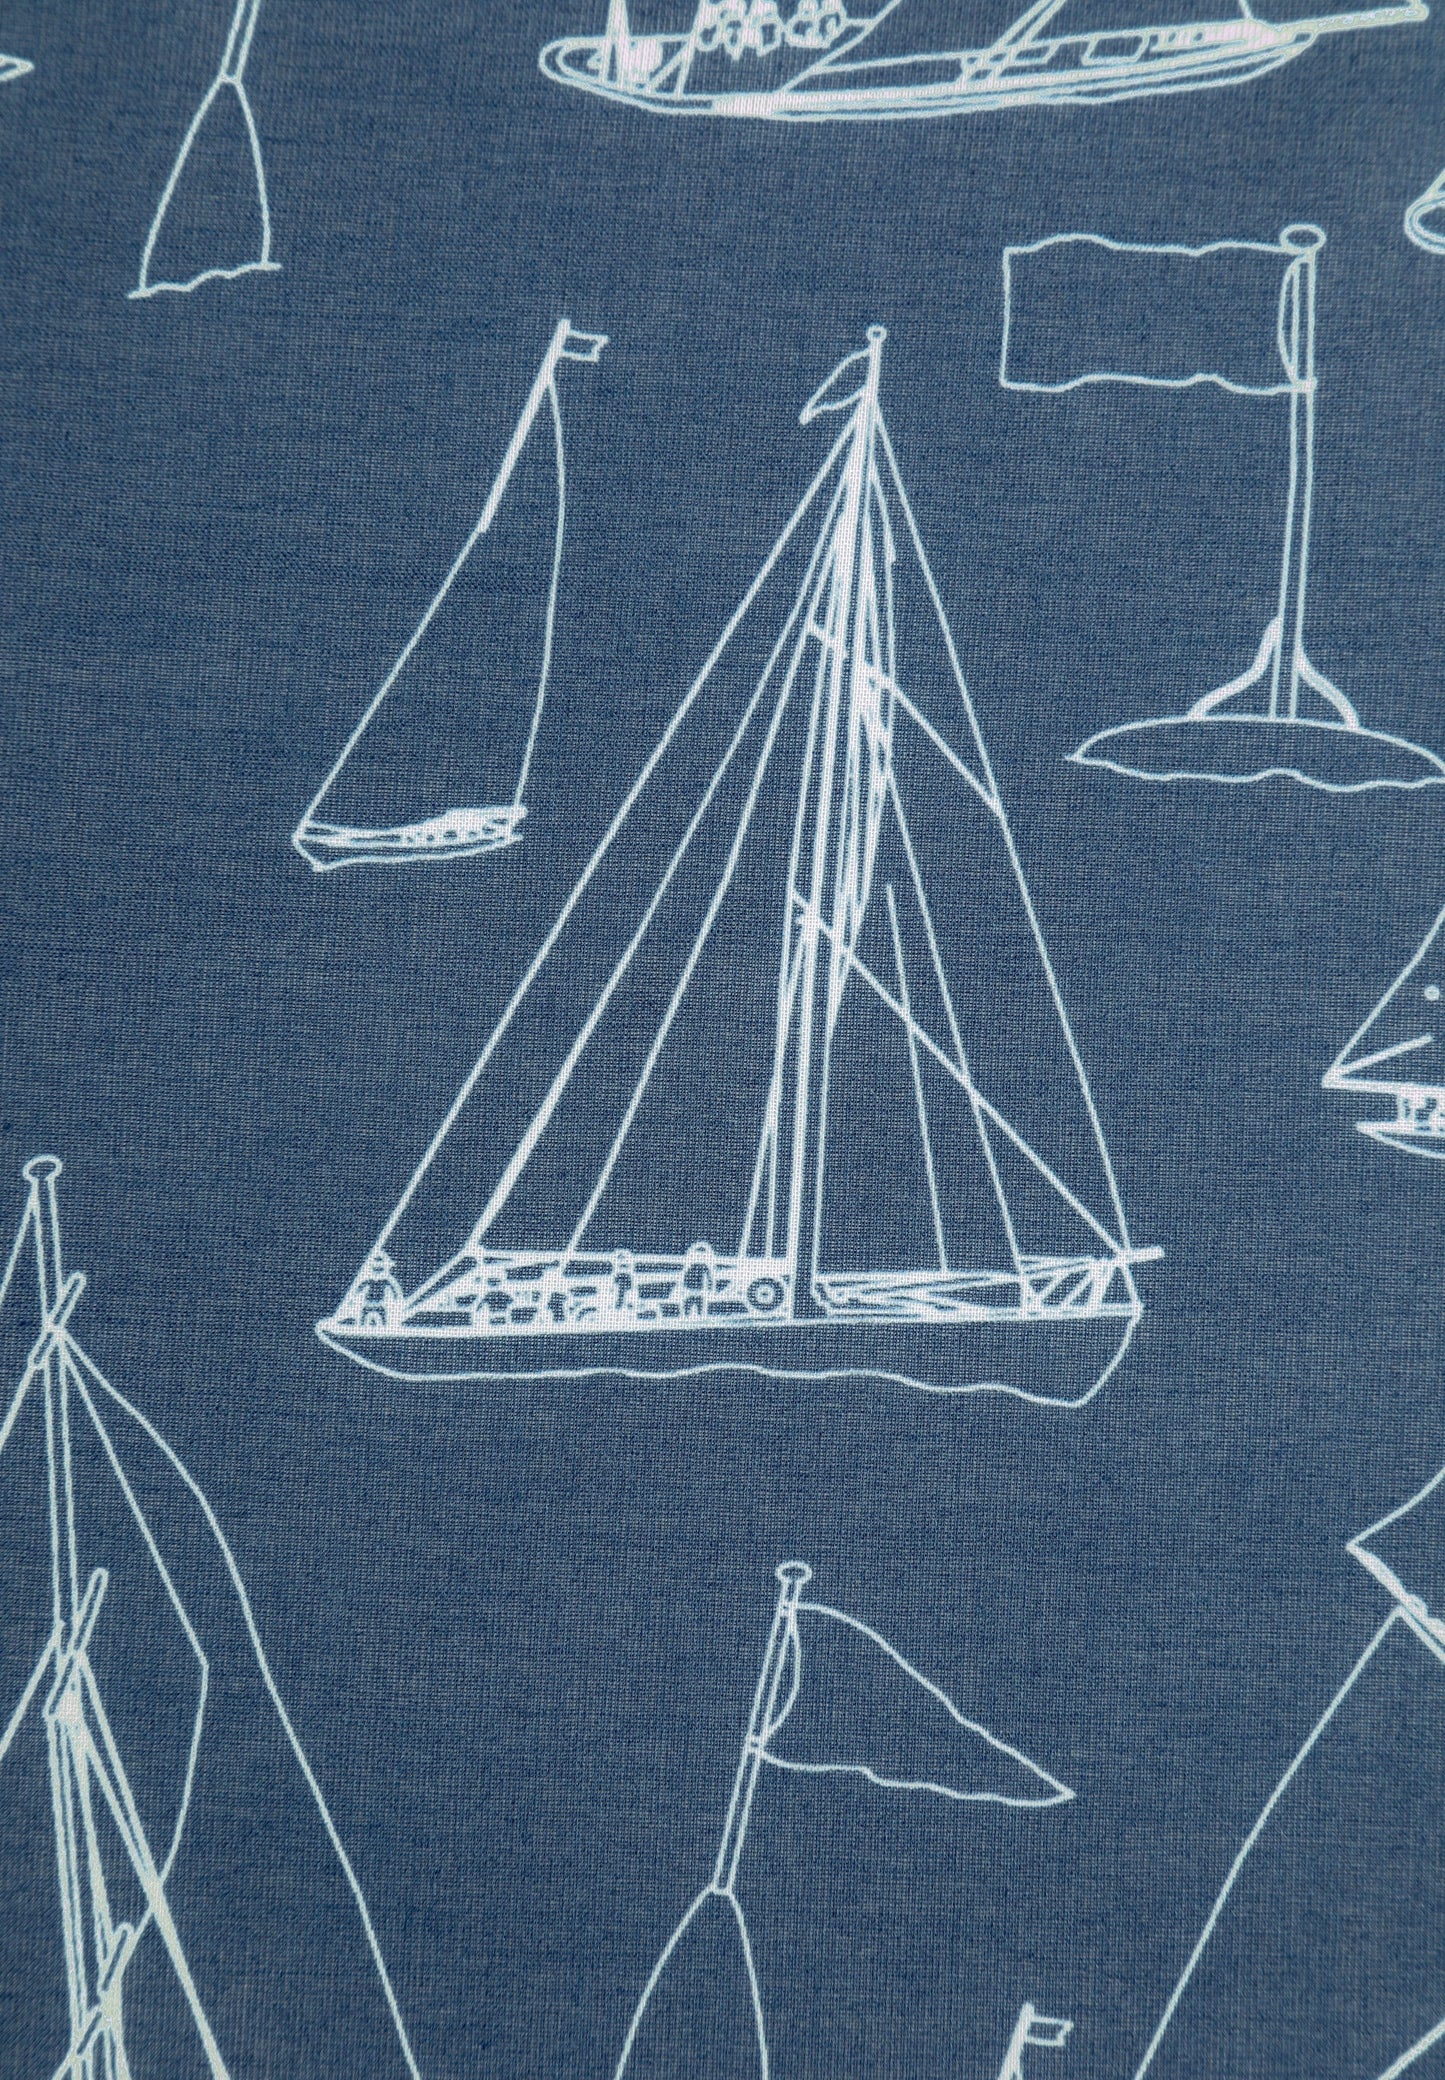 POCKET SQUARE WITH BOAT MOTIFS